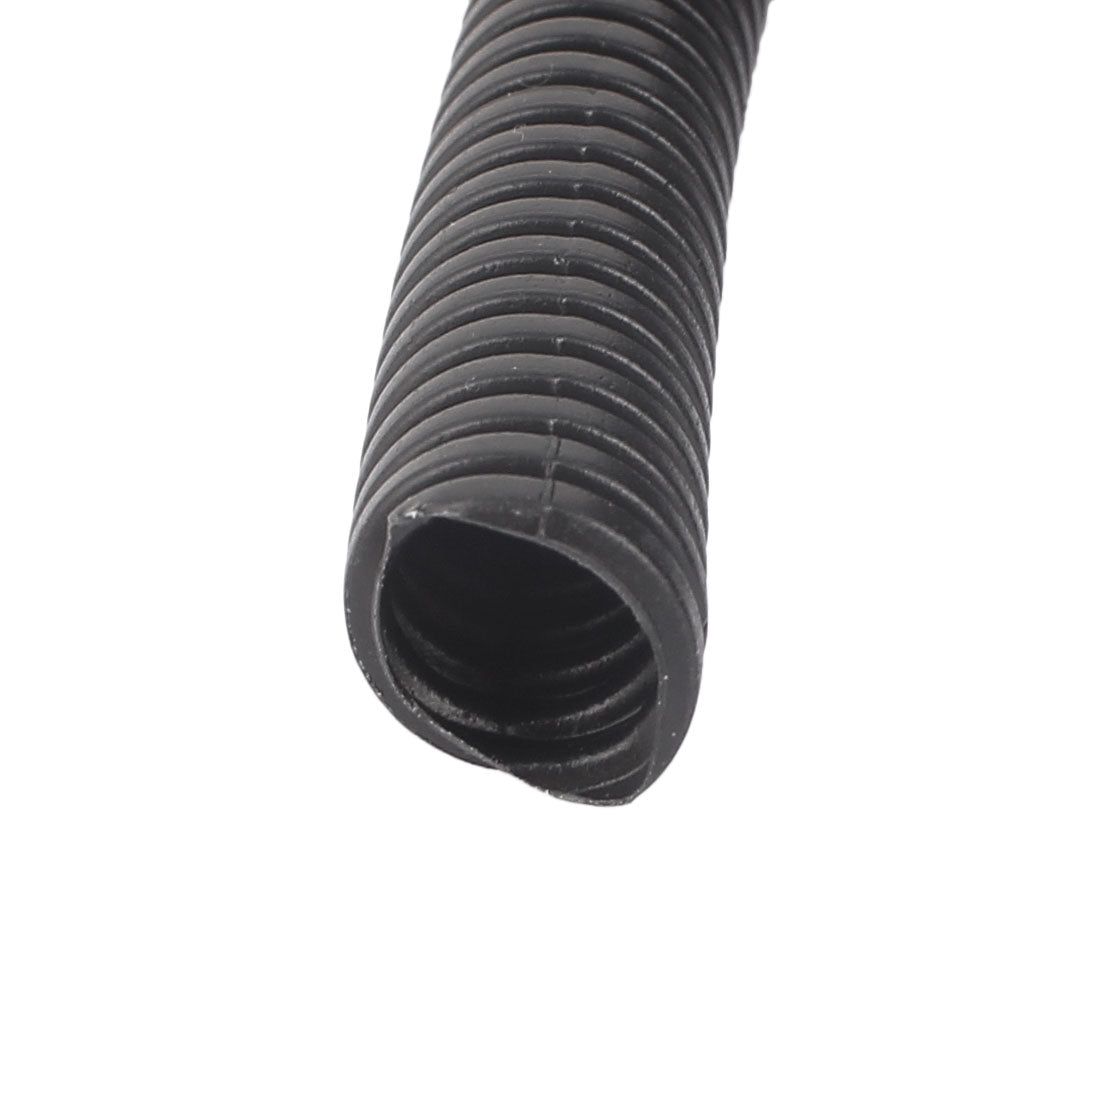 uxcell Uxcell 11 M 10 x 13 mm PVC Flexible Corrugated Conduit Tube for Garden,Office Black